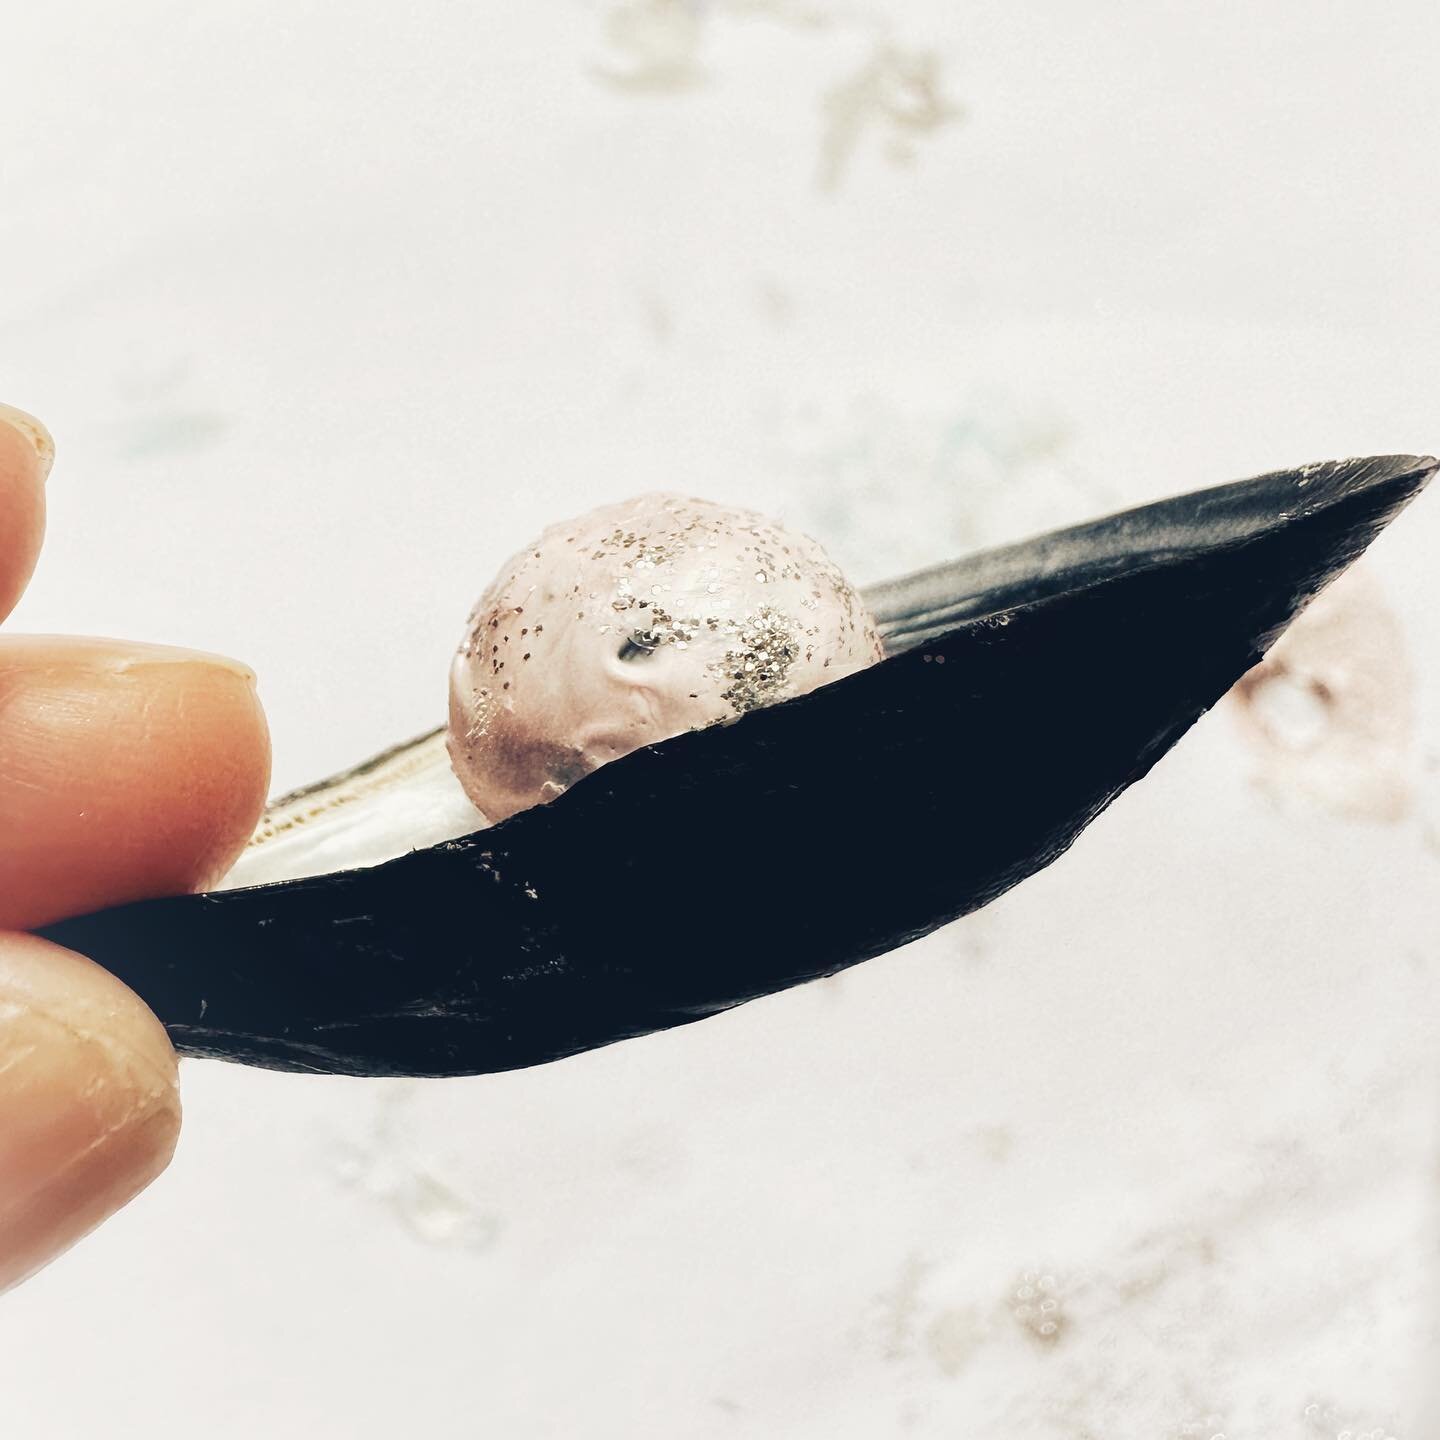 45 loops round the sun completed today. I received two beautiful and very meta gifts. The first a marble painted as a pearl from my five-year-old daughter. 🖤She also painted the black shell black, overlaying the object with its own representation. M